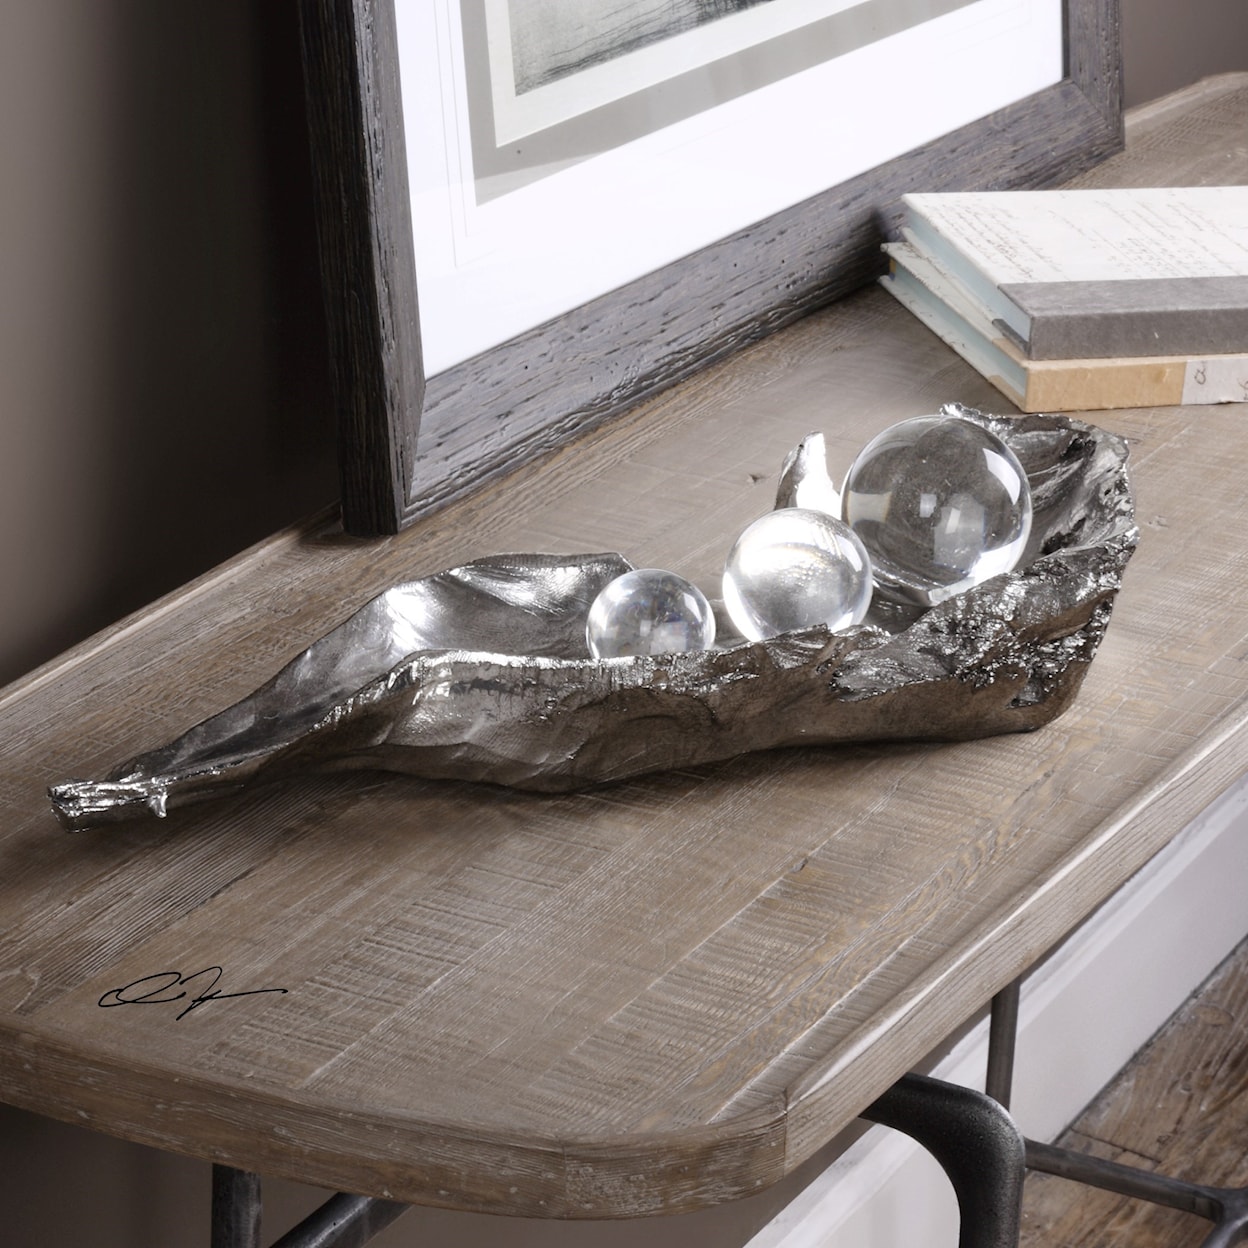 Uttermost Accessories - Statues and Figurines Three Peas In A Pod